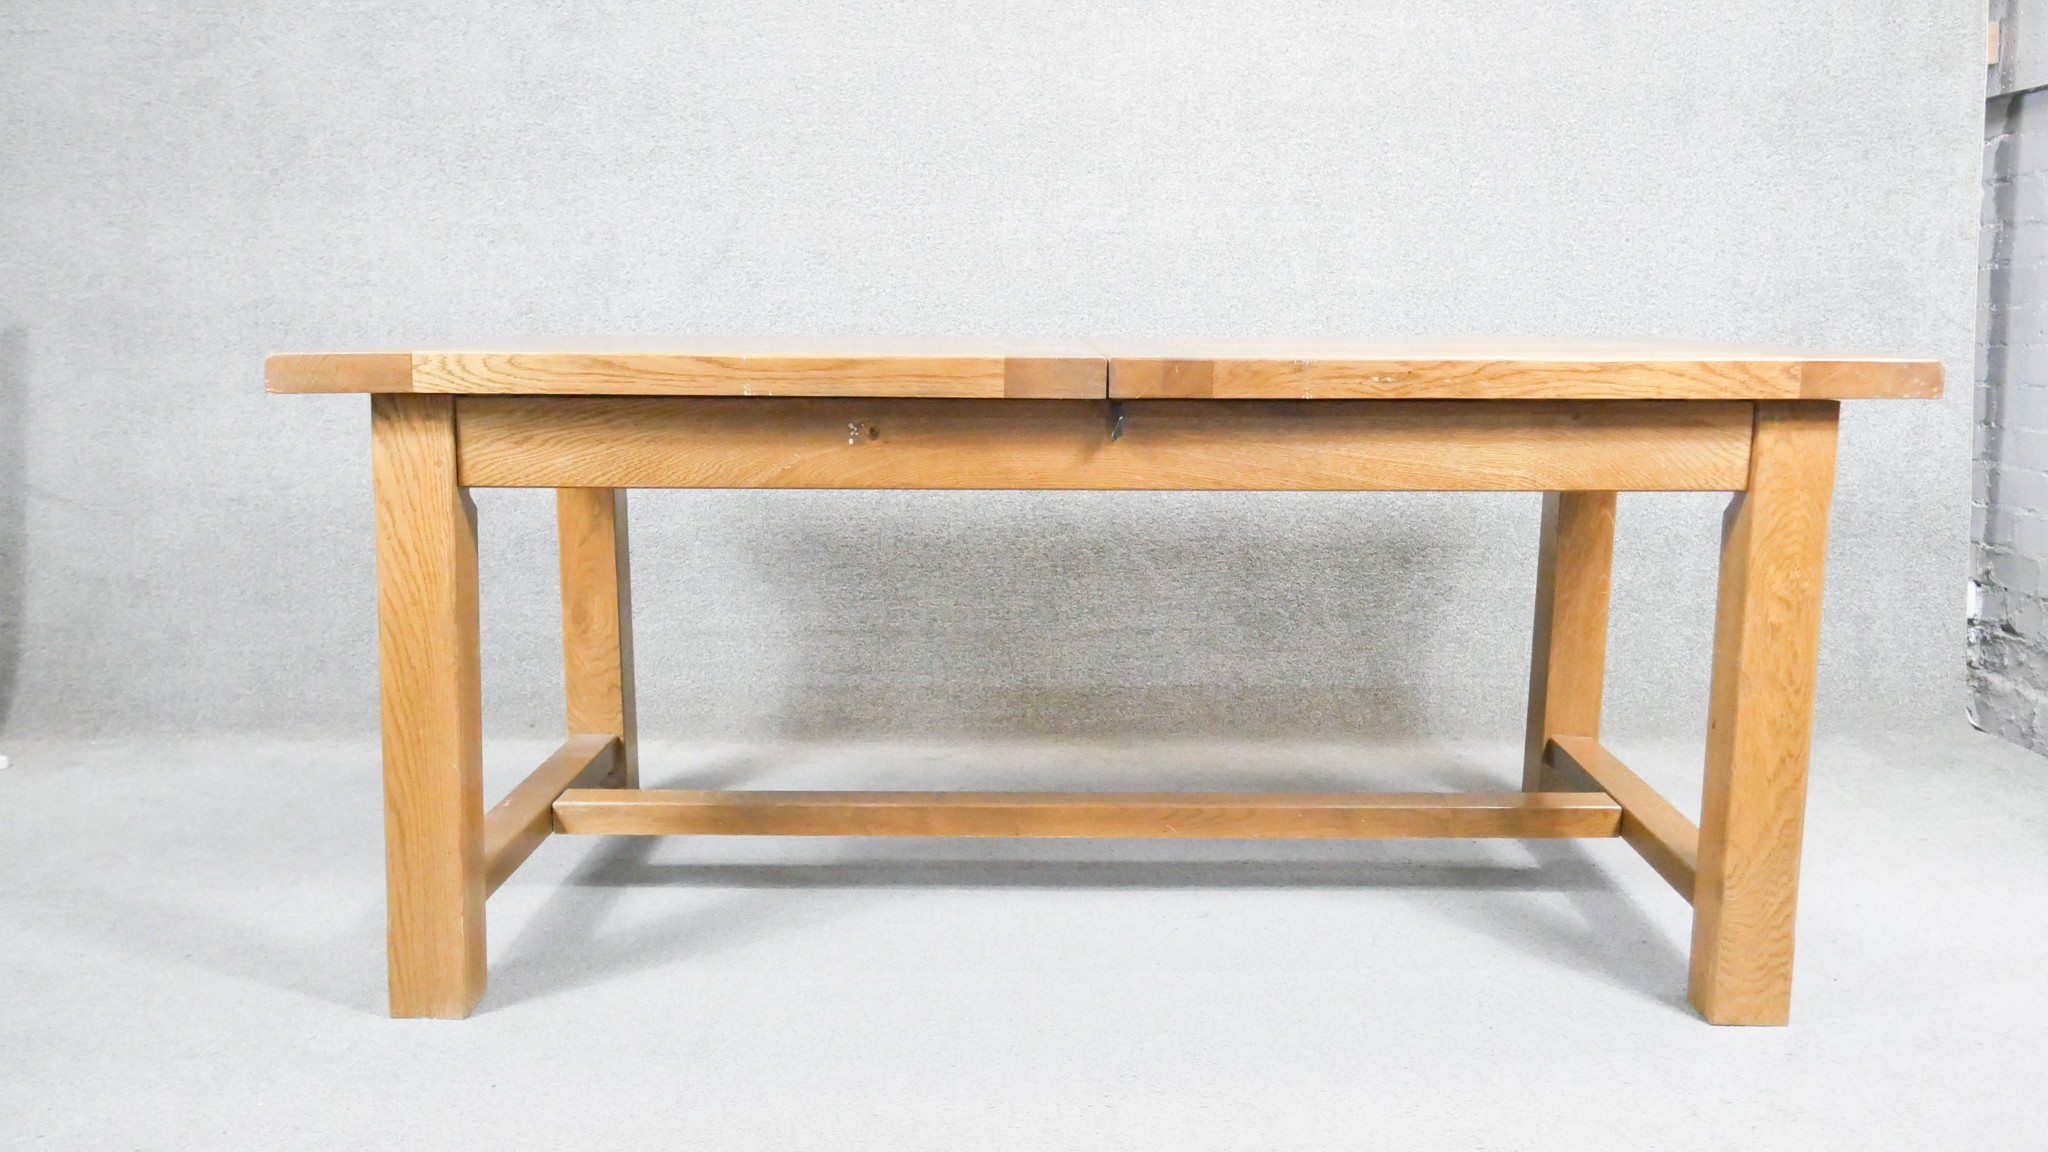 A contemporary John Lewis light oak planked top extending dining table on stretchered square